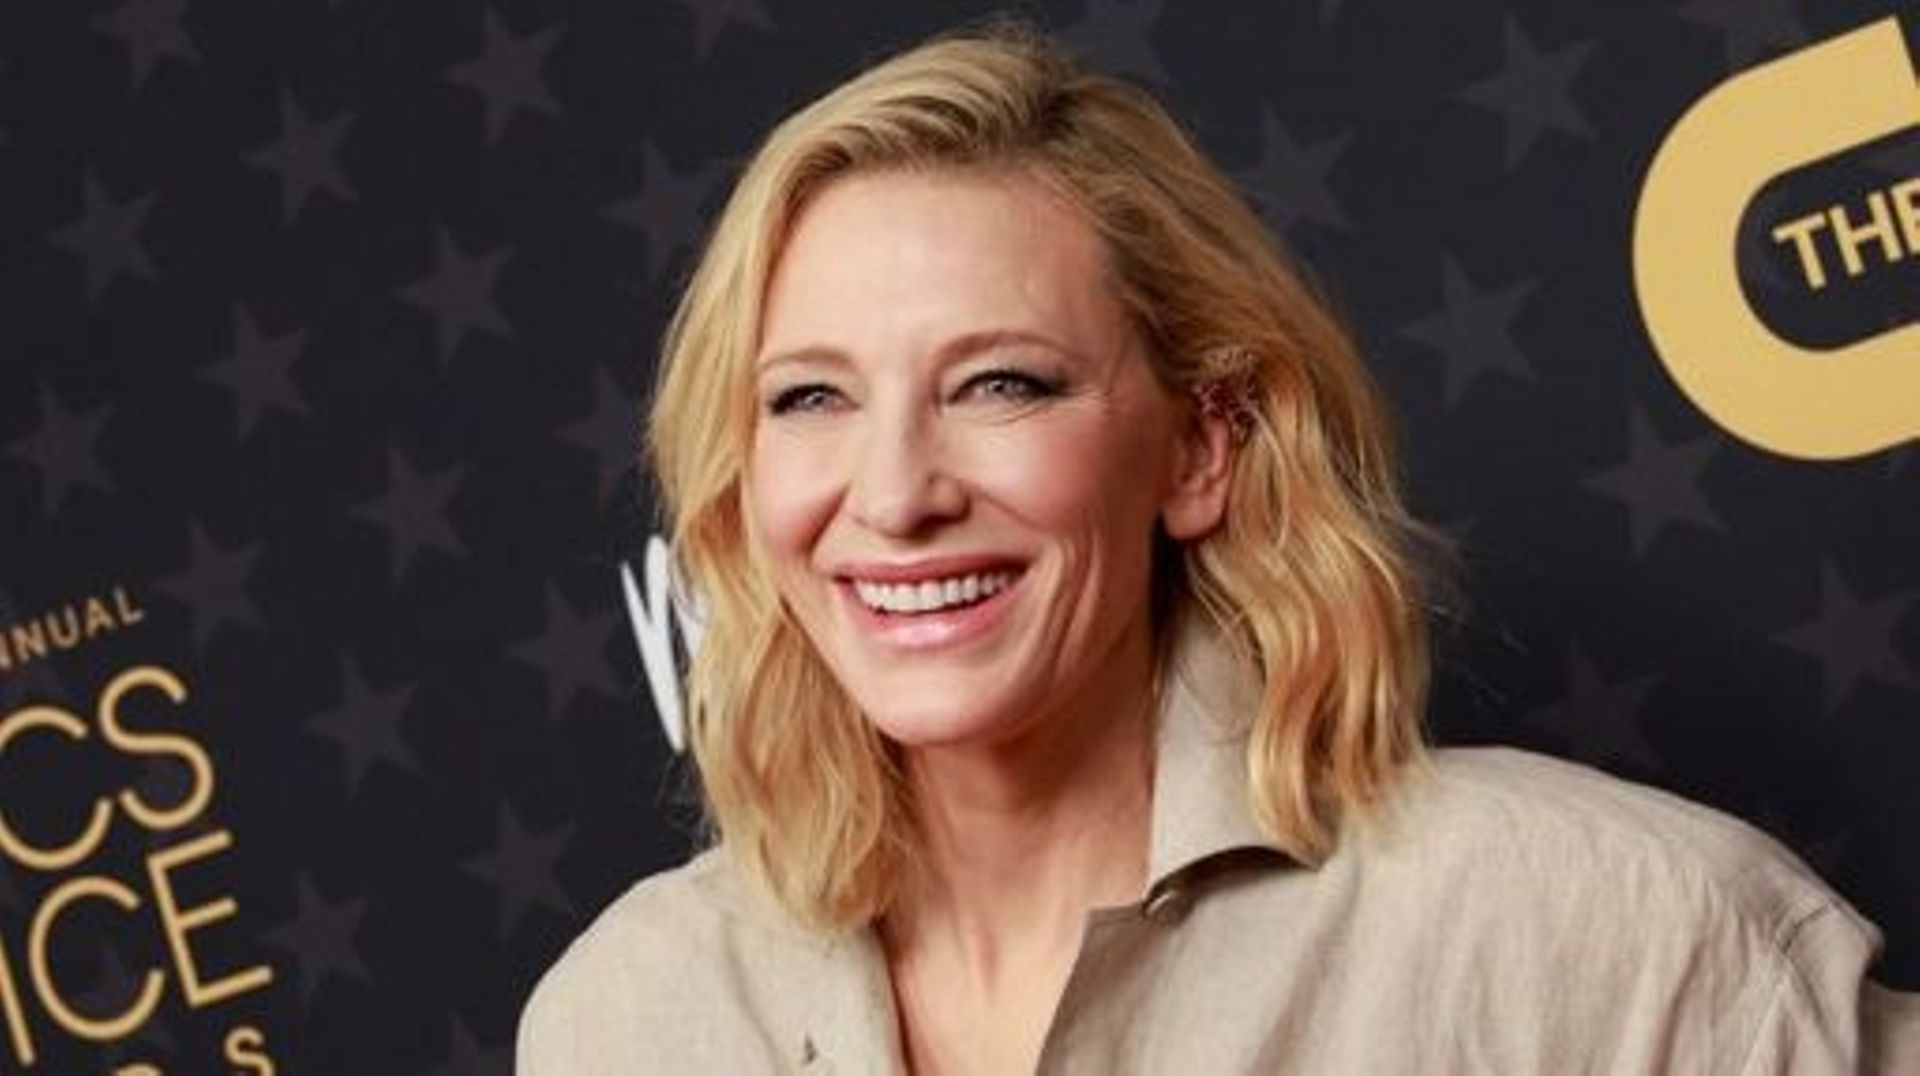 US-Australian actress Cate Blanchett arrives for the 28th Annual Critics Choice Awards at the Fairmont Century Plaza Hotel in Los Angeles, California on January 15, 2023.  Michael TRAN / AFP